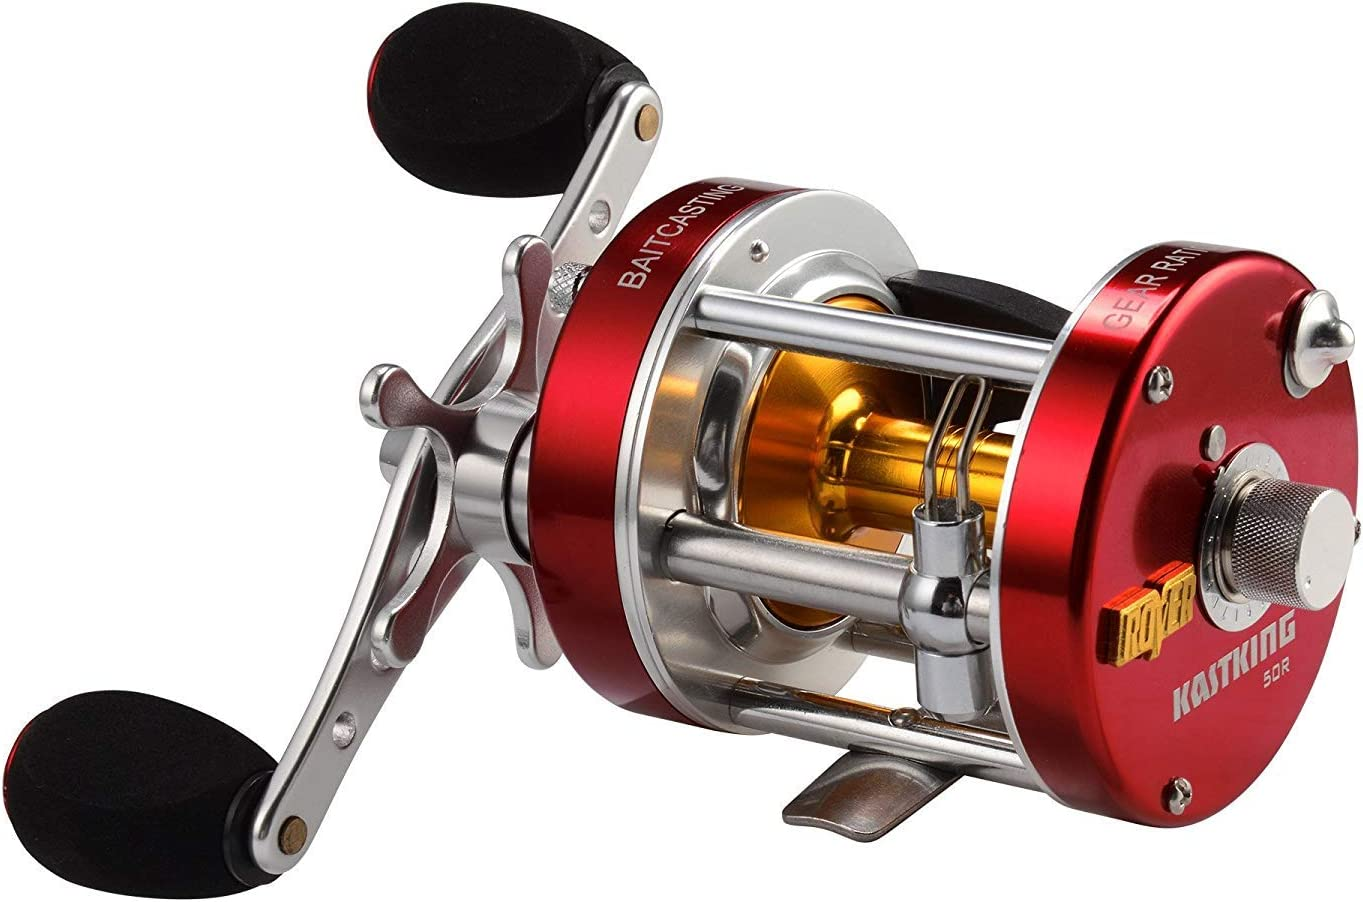 KastKing Rover Round - Best for Conventional Fishing